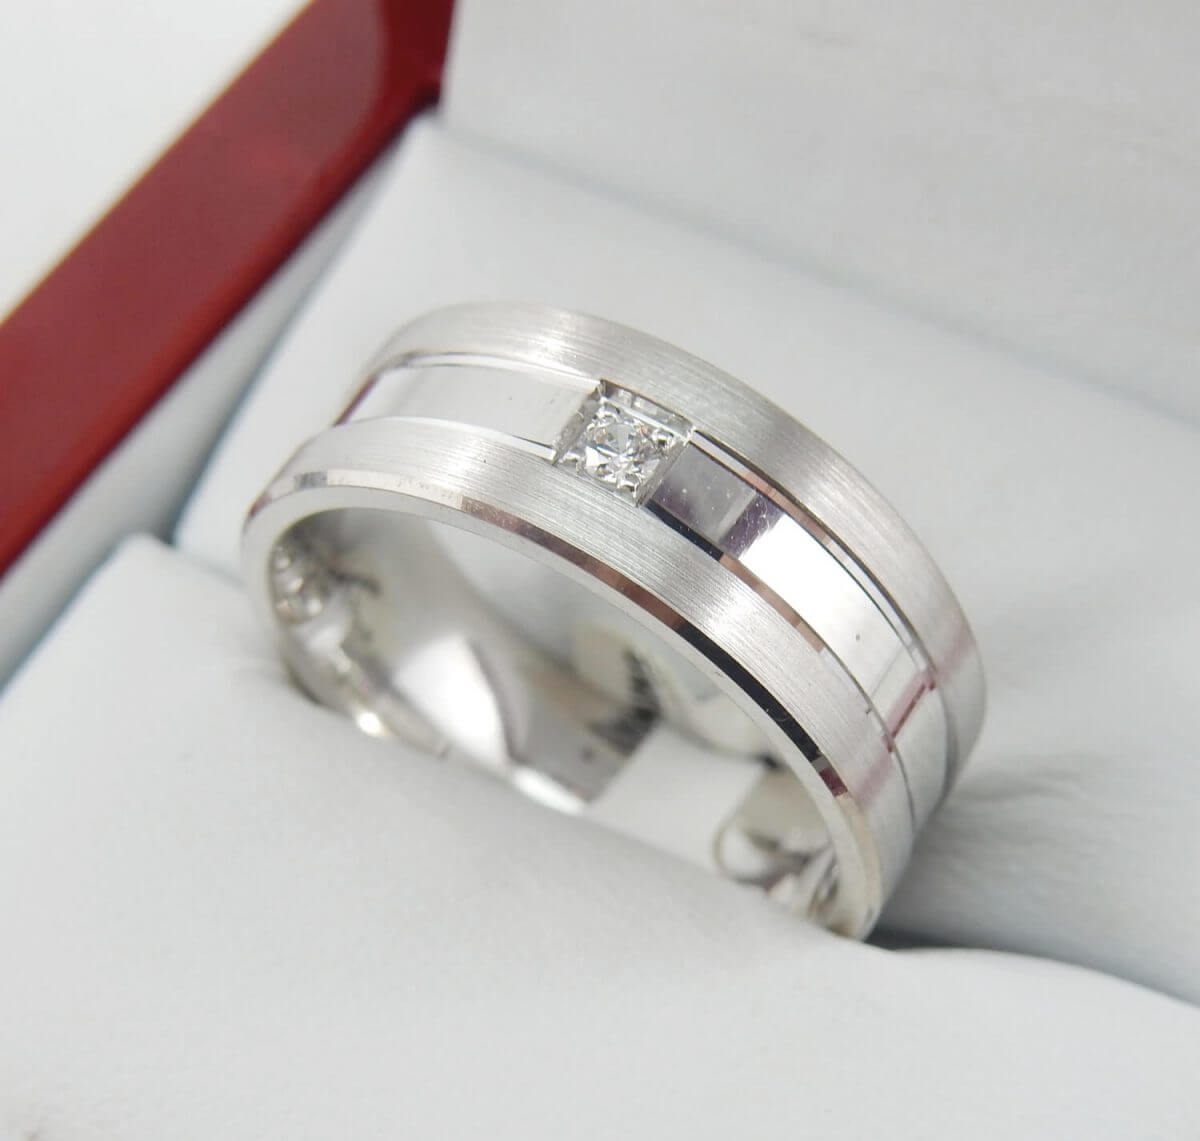 8mm Rect Comfort Fit Engraved Diamond Wedding Band